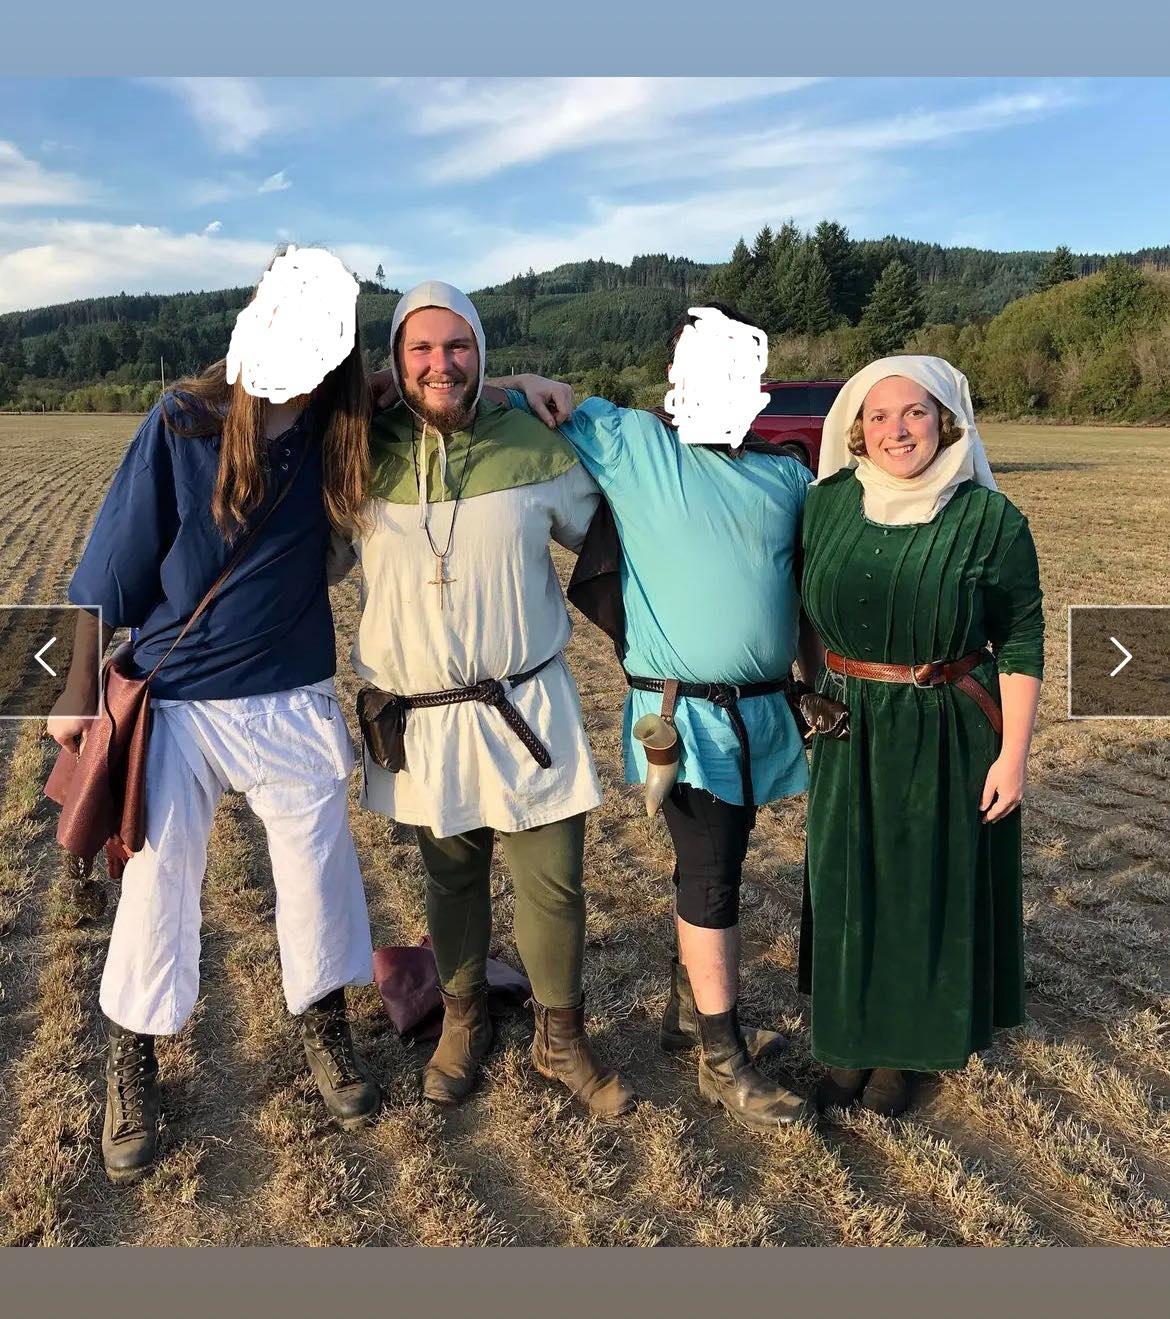 Picture of Erick and Samantha with two other people who's faces are redacted; they are all wearing old-timey costumes while they stand in what appears to be a farm field